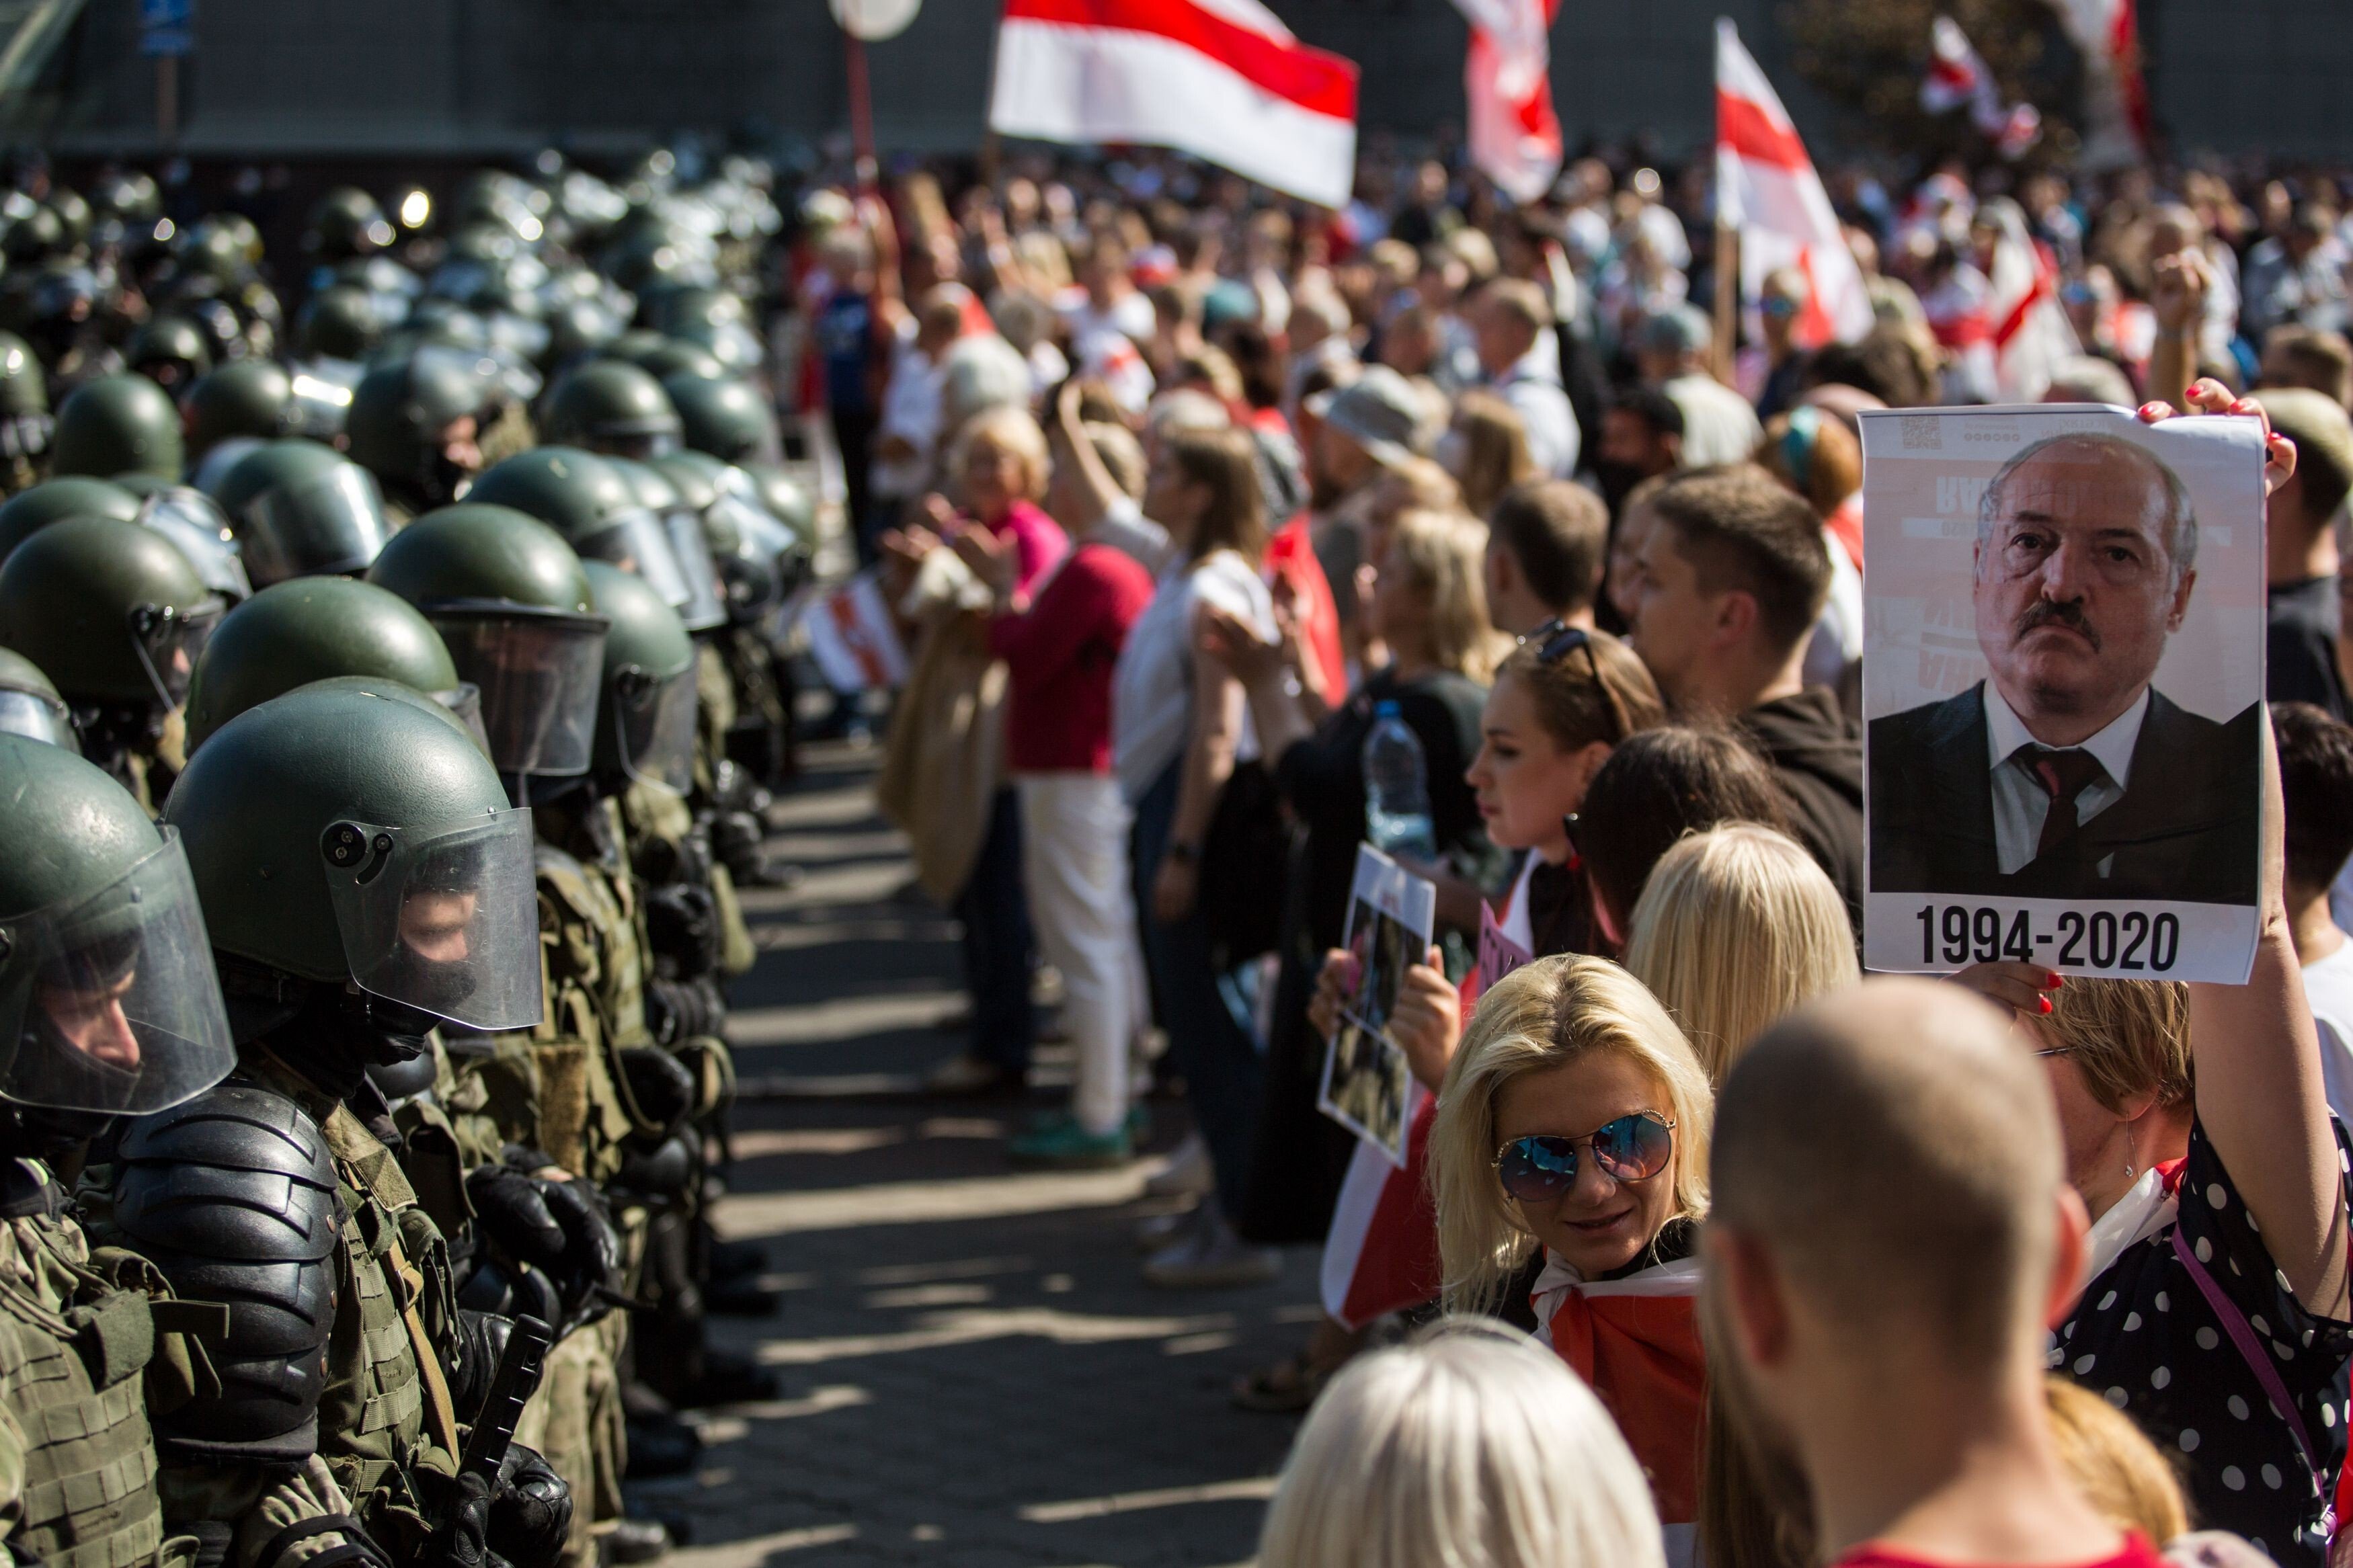 Belarusian servicemen block a street in Minsk on August 30 during a rally by opposition supporters protesting against disputed presidential election results. Tens of thousands of opposition supporters marched through the city calling for an end to strongman Alexander Lukashenko’s rule. Photo: TUT.BY/ AFP